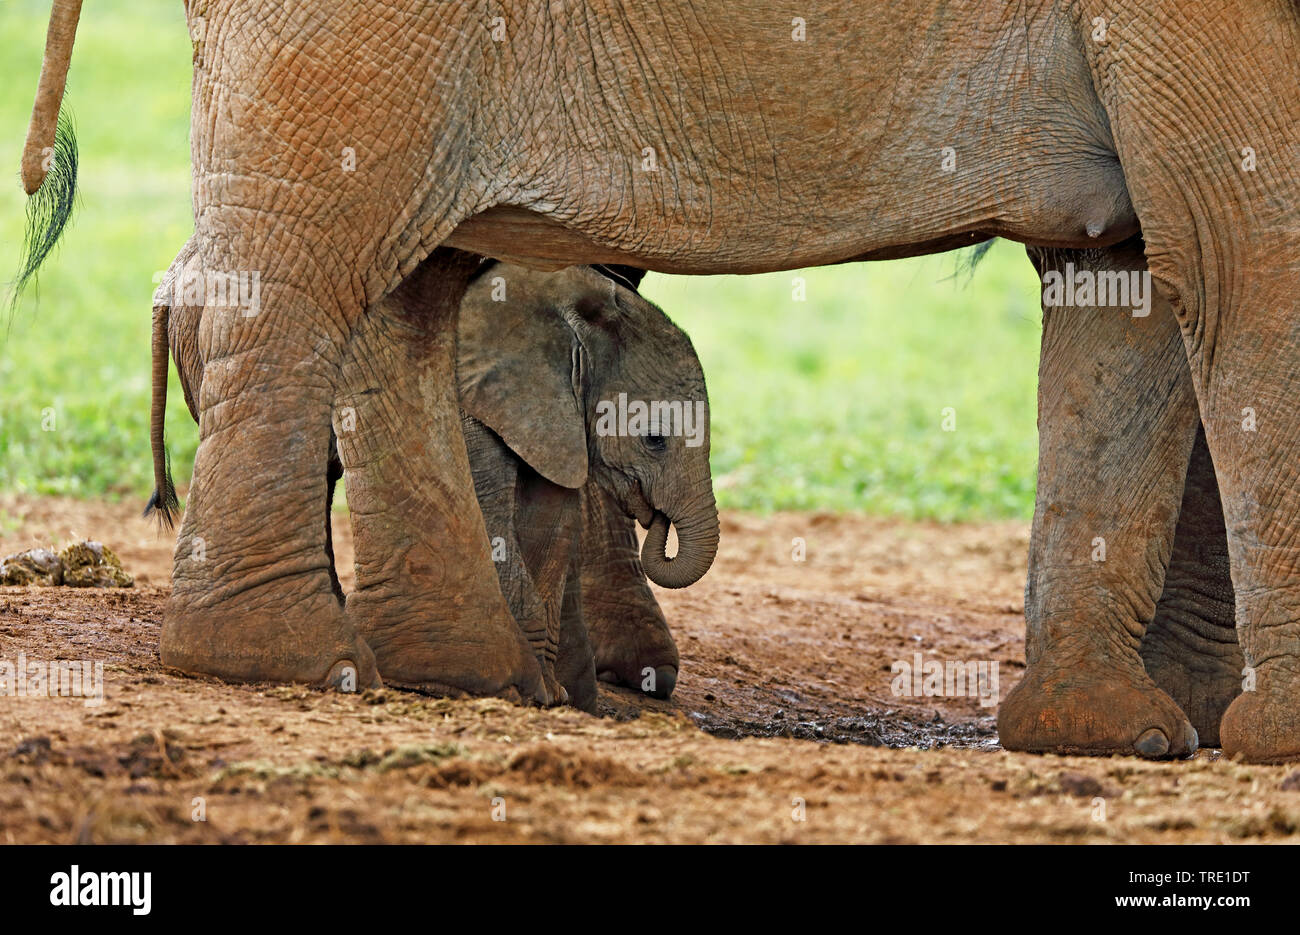 African elephant (Loxodonta africana), young calf under belly of the mother, side view, South Africa, Eastern Cape, Addo Elephant National Park Stock Photo